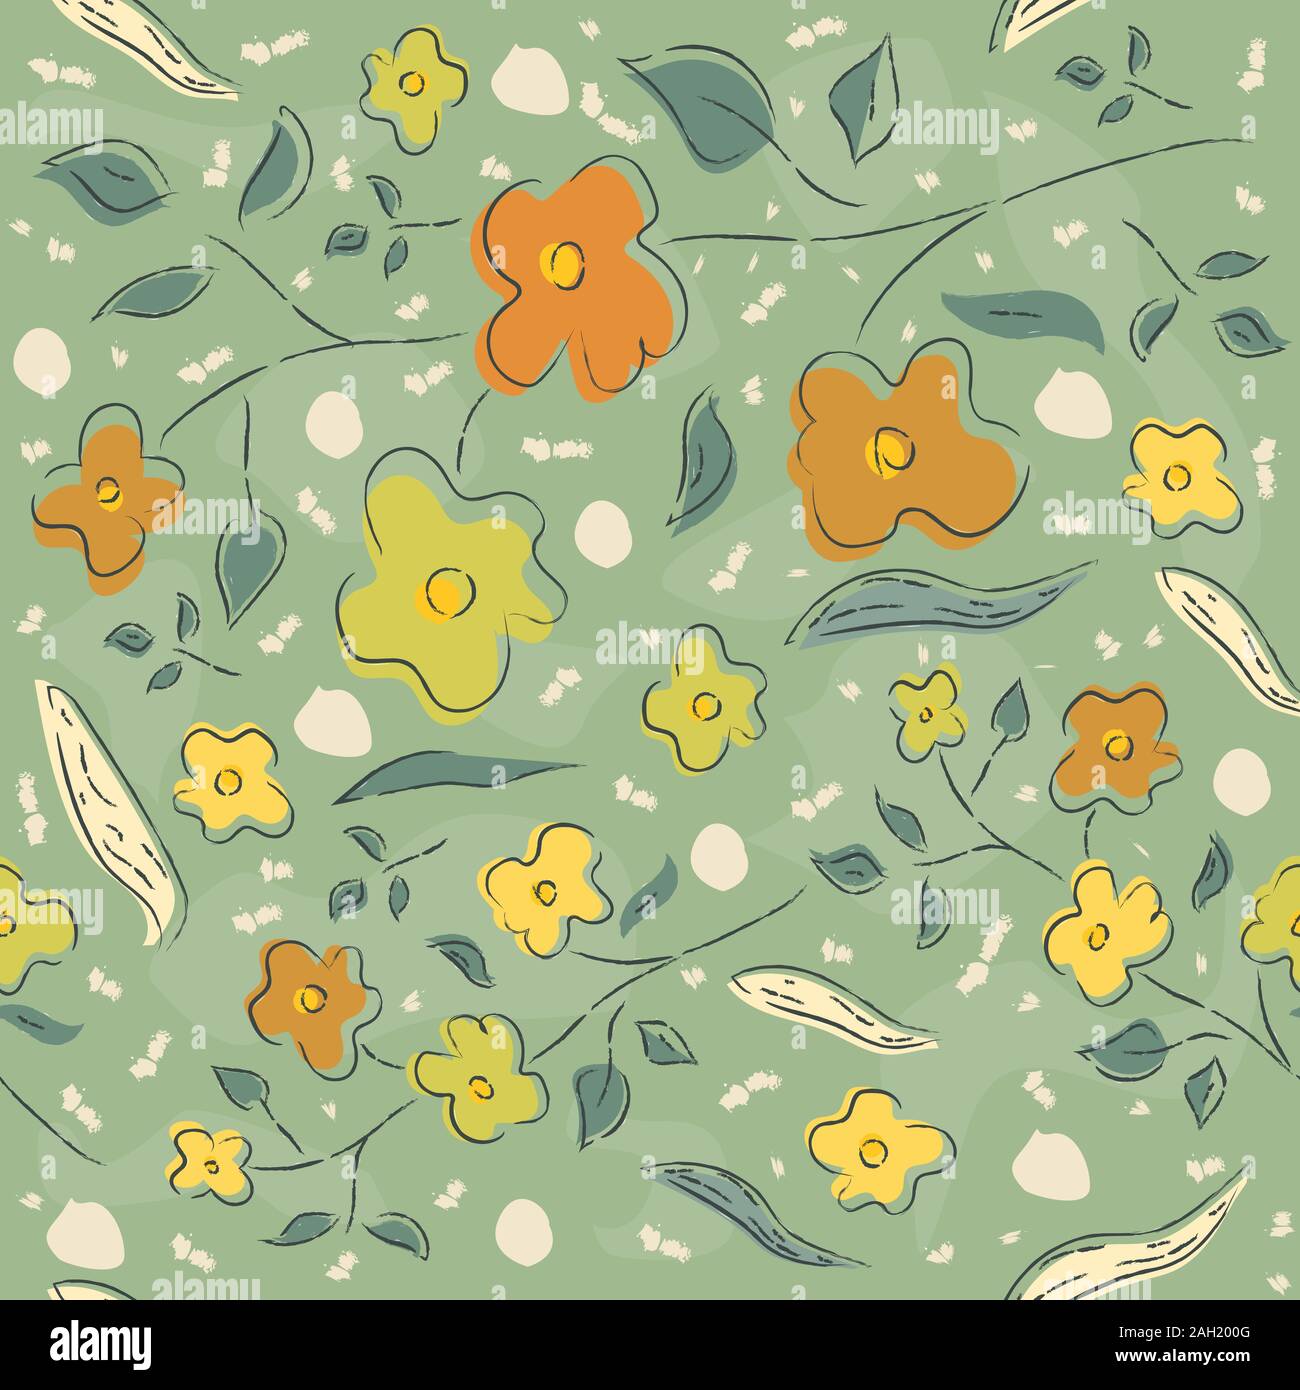 Floral and doodle Seamless Pattern. For backgrounds, wallpapers, fabric, prints, textiles, wrapping, cards, swatches, t-shirts, scrapbooks, blankets, Stock Vector